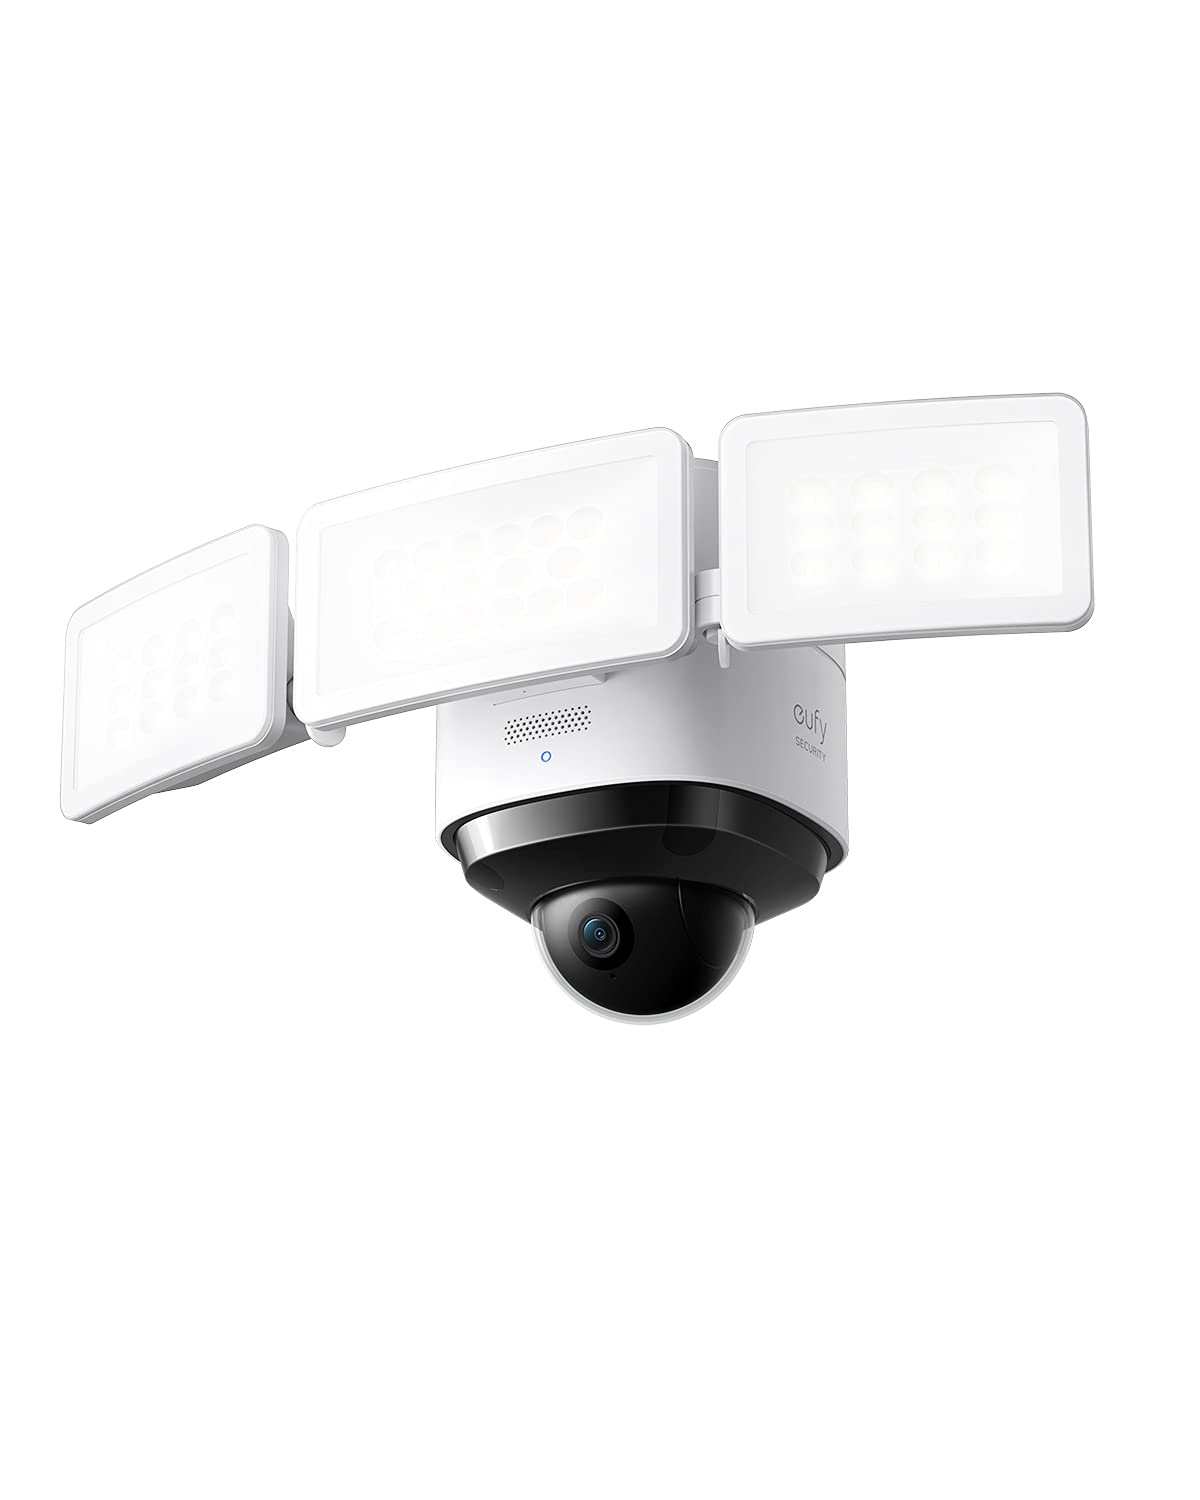 eufy Security S330 Floodlight Security Camera 2 Pro, 360-Degree Pan & Tilt Coverage, 2K Full HD, 3,000 Lumens, Weatherproof, AI Subject Lock and Tracking, No Monthly Fee, Hardwired, Motion Only Alert